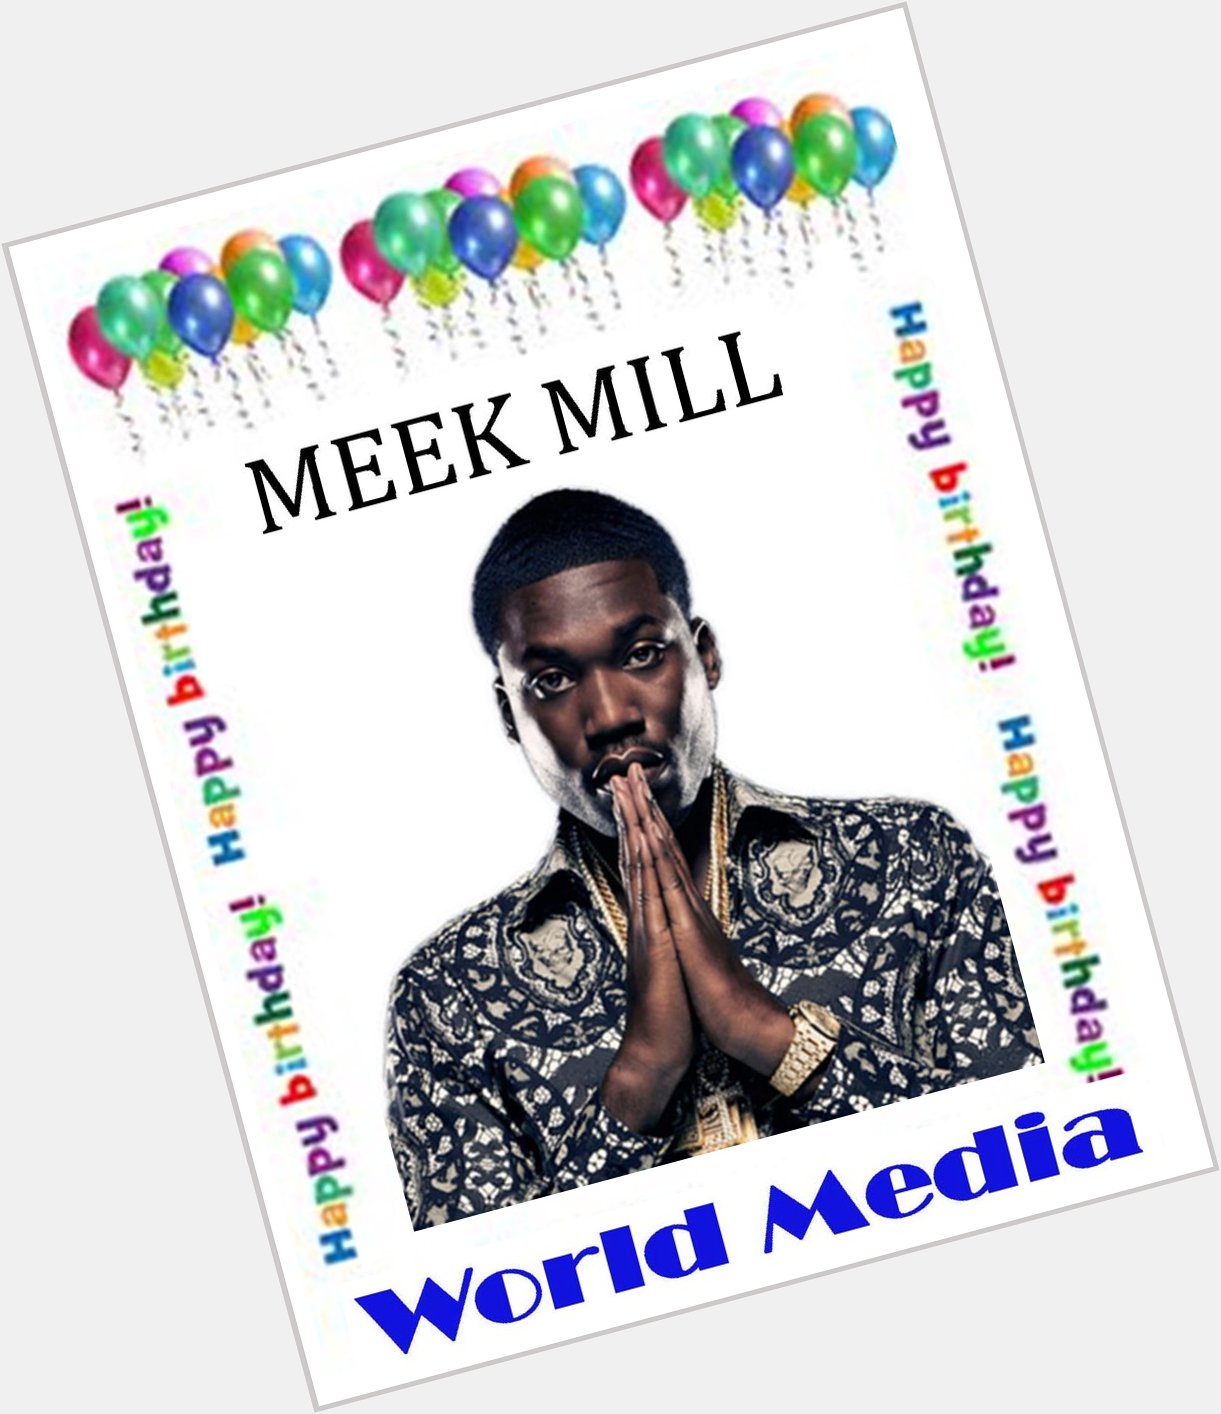 LETS\ ALL WISH RAPPER MEEK MILL......RECENTLY RELEASED FROM PRISON A HAPPY BIRTHDAY 